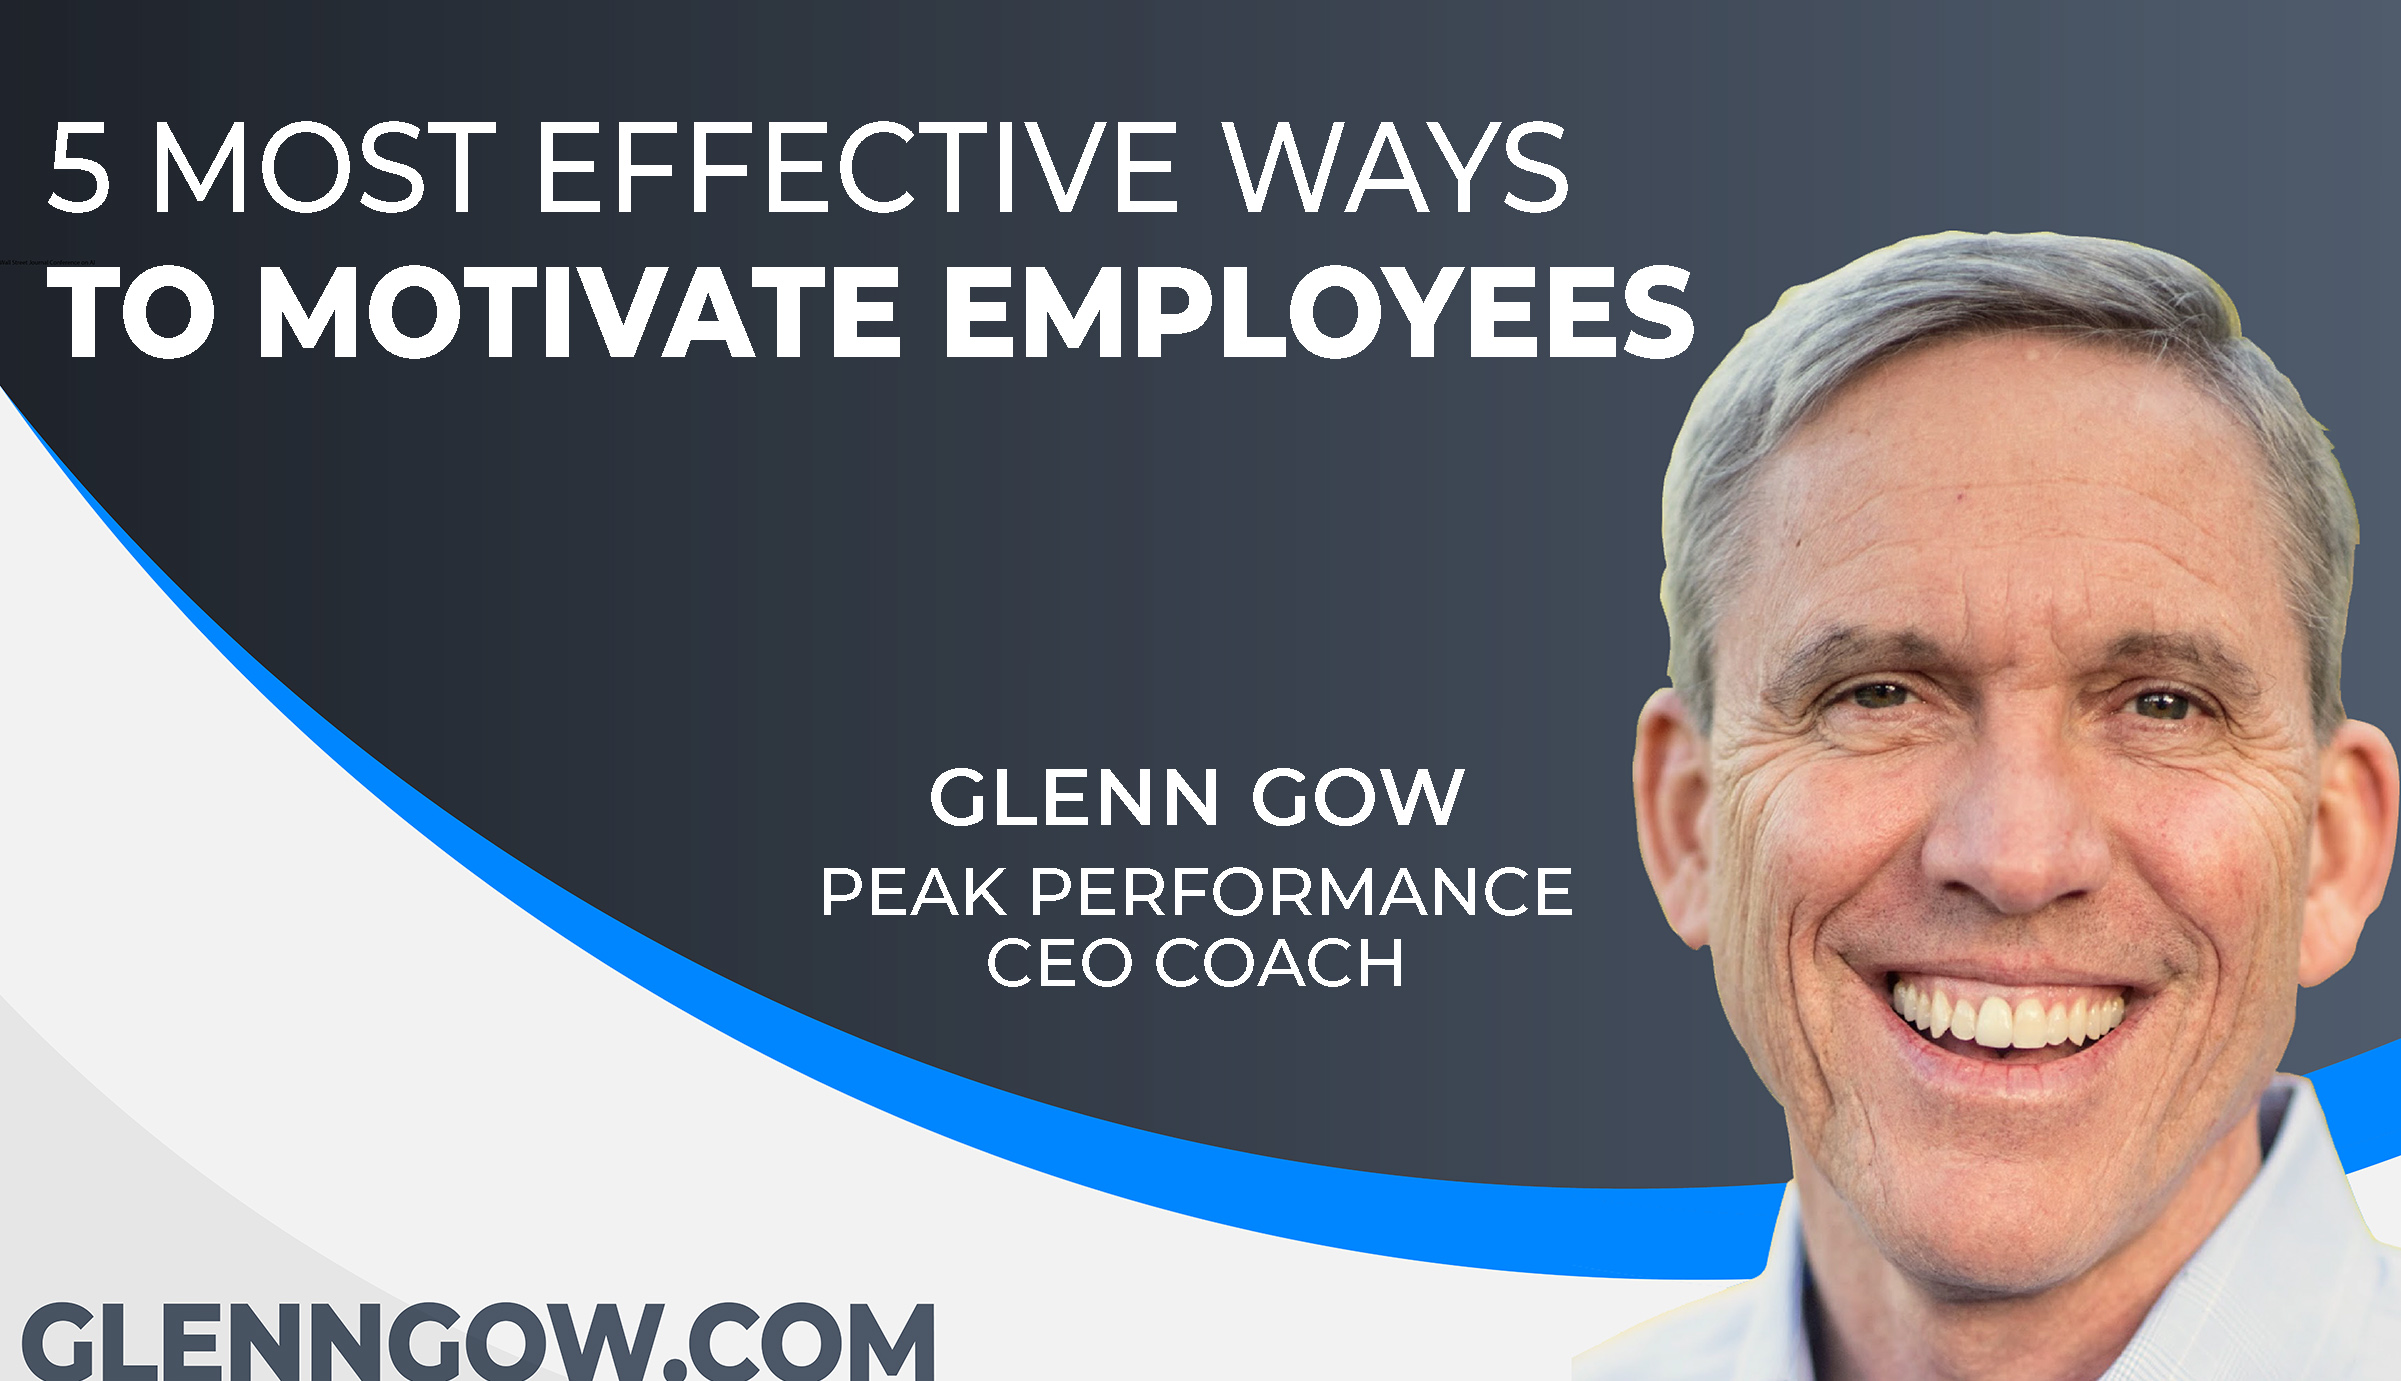 Most effective ways to motivate employees image banner